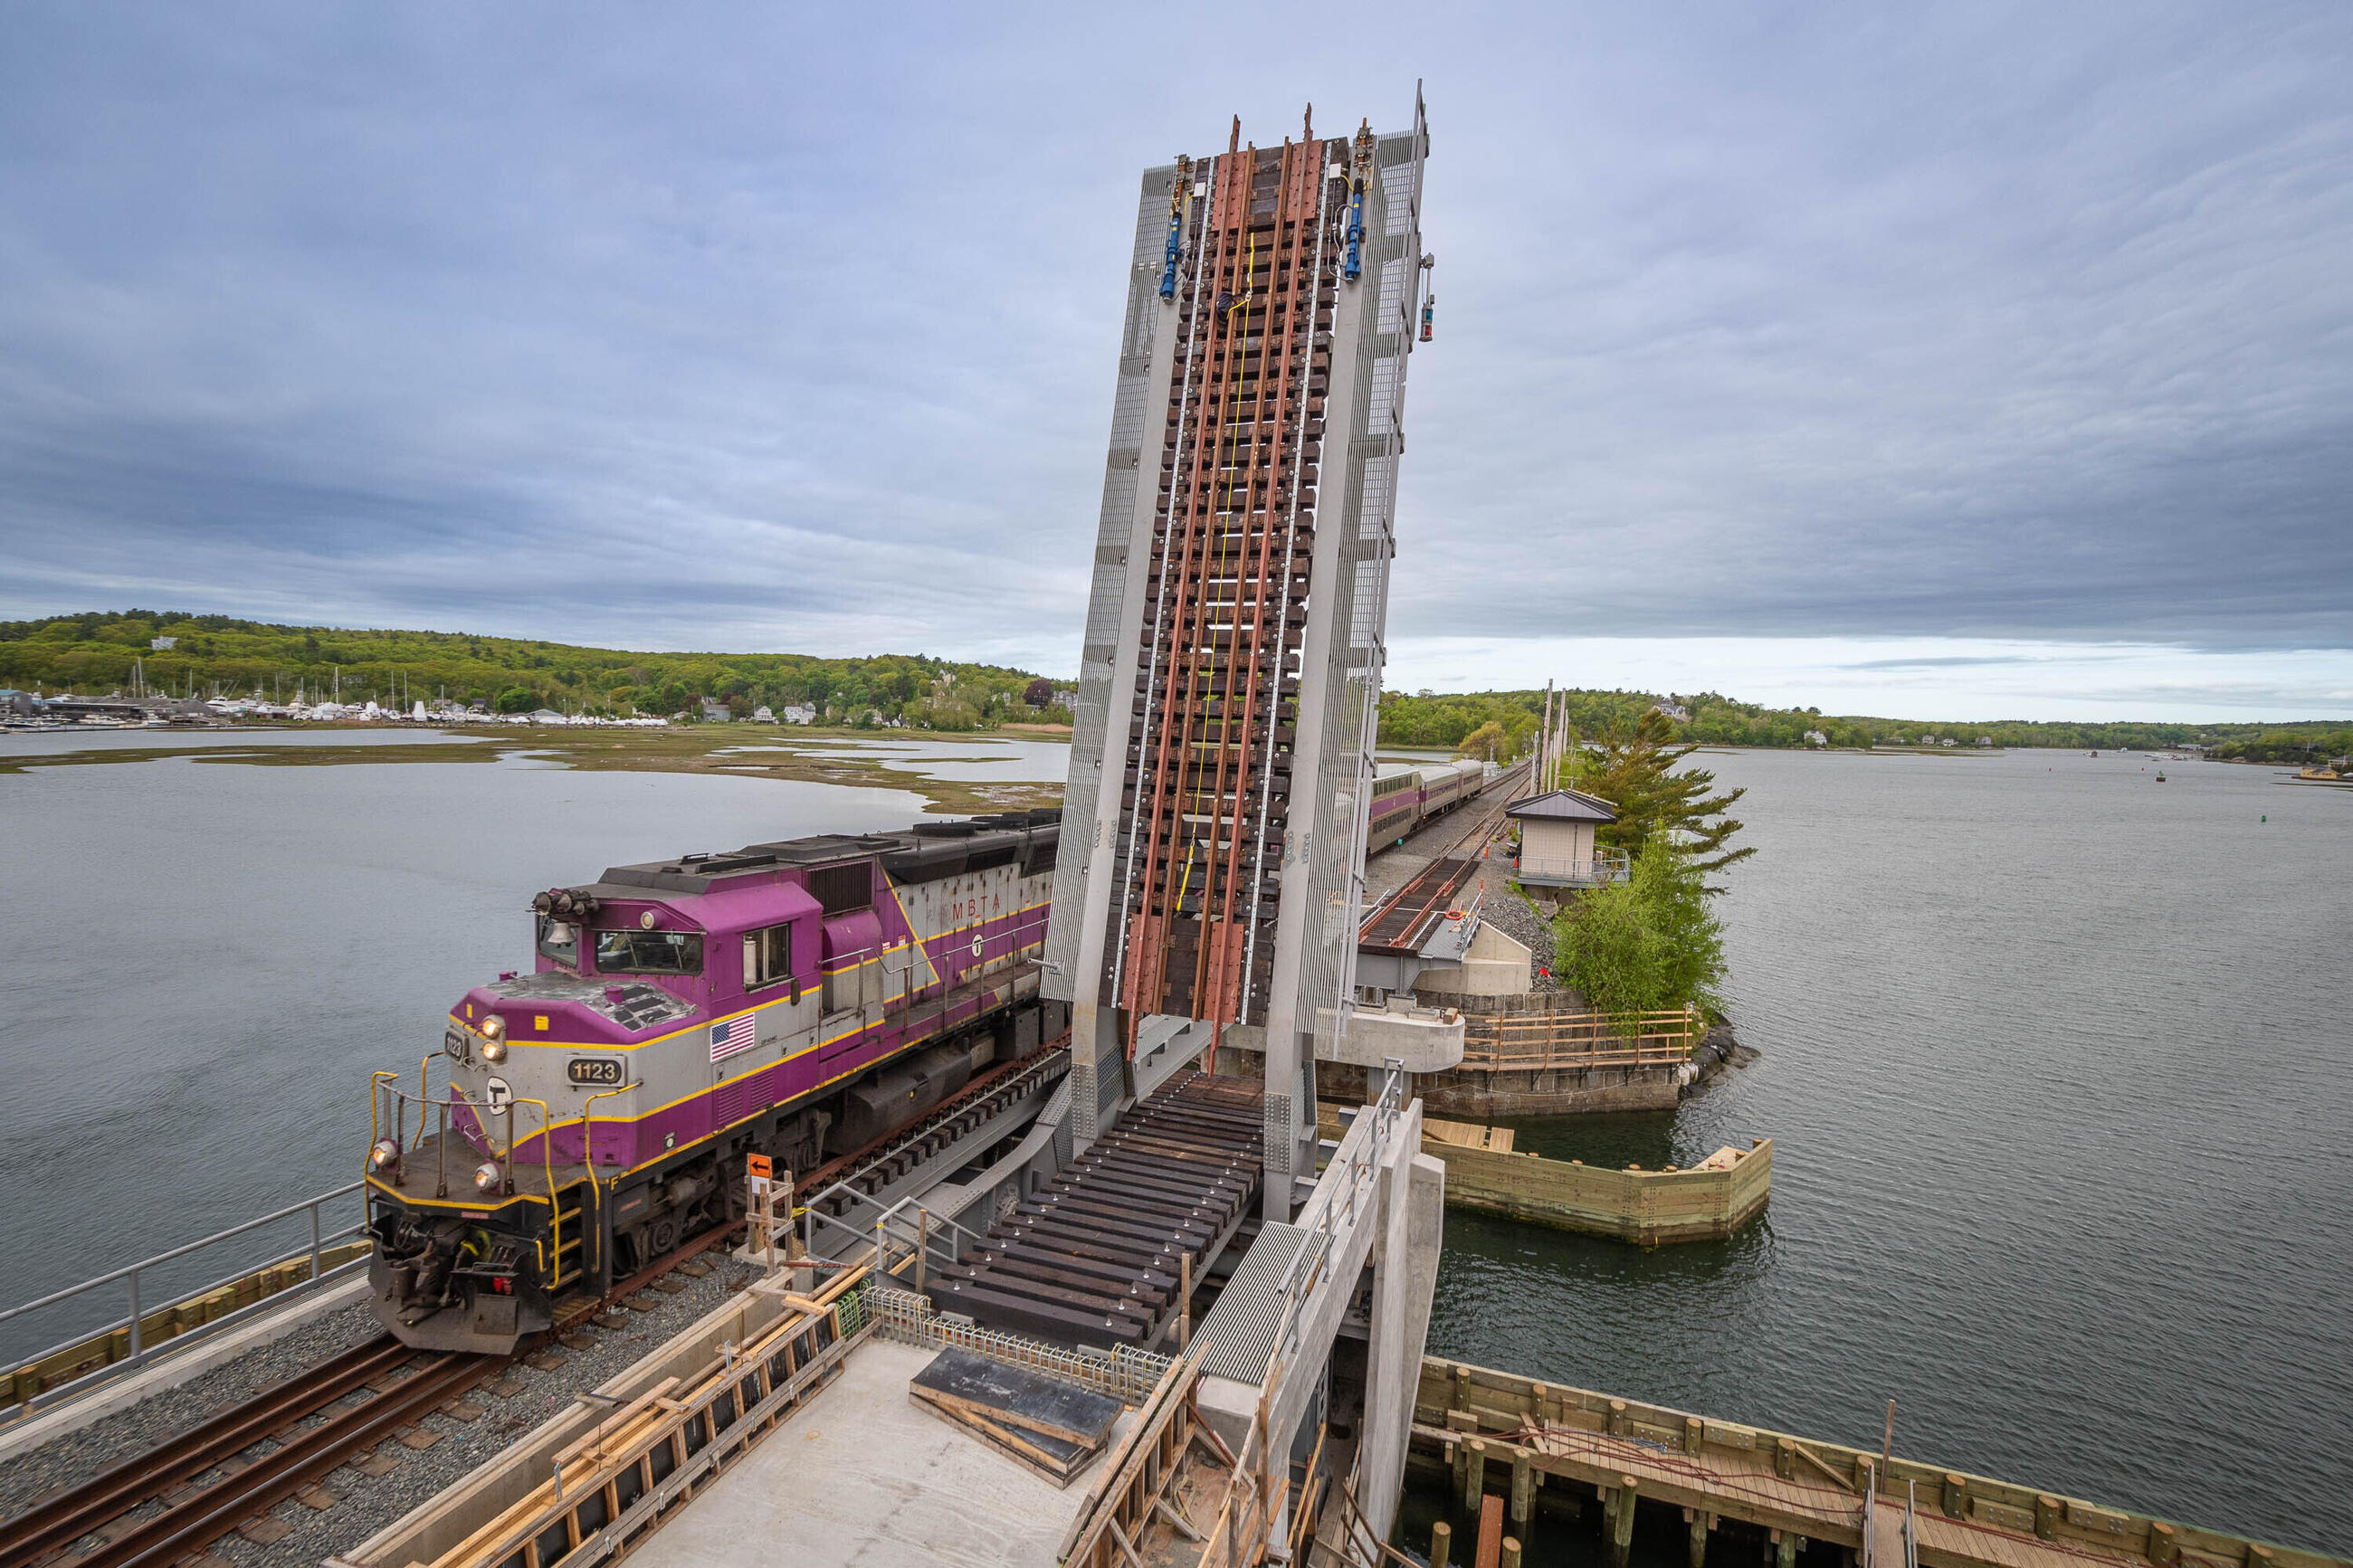 Commuter rail train operating on single lane of Gloucester bridge, other lane is lifted